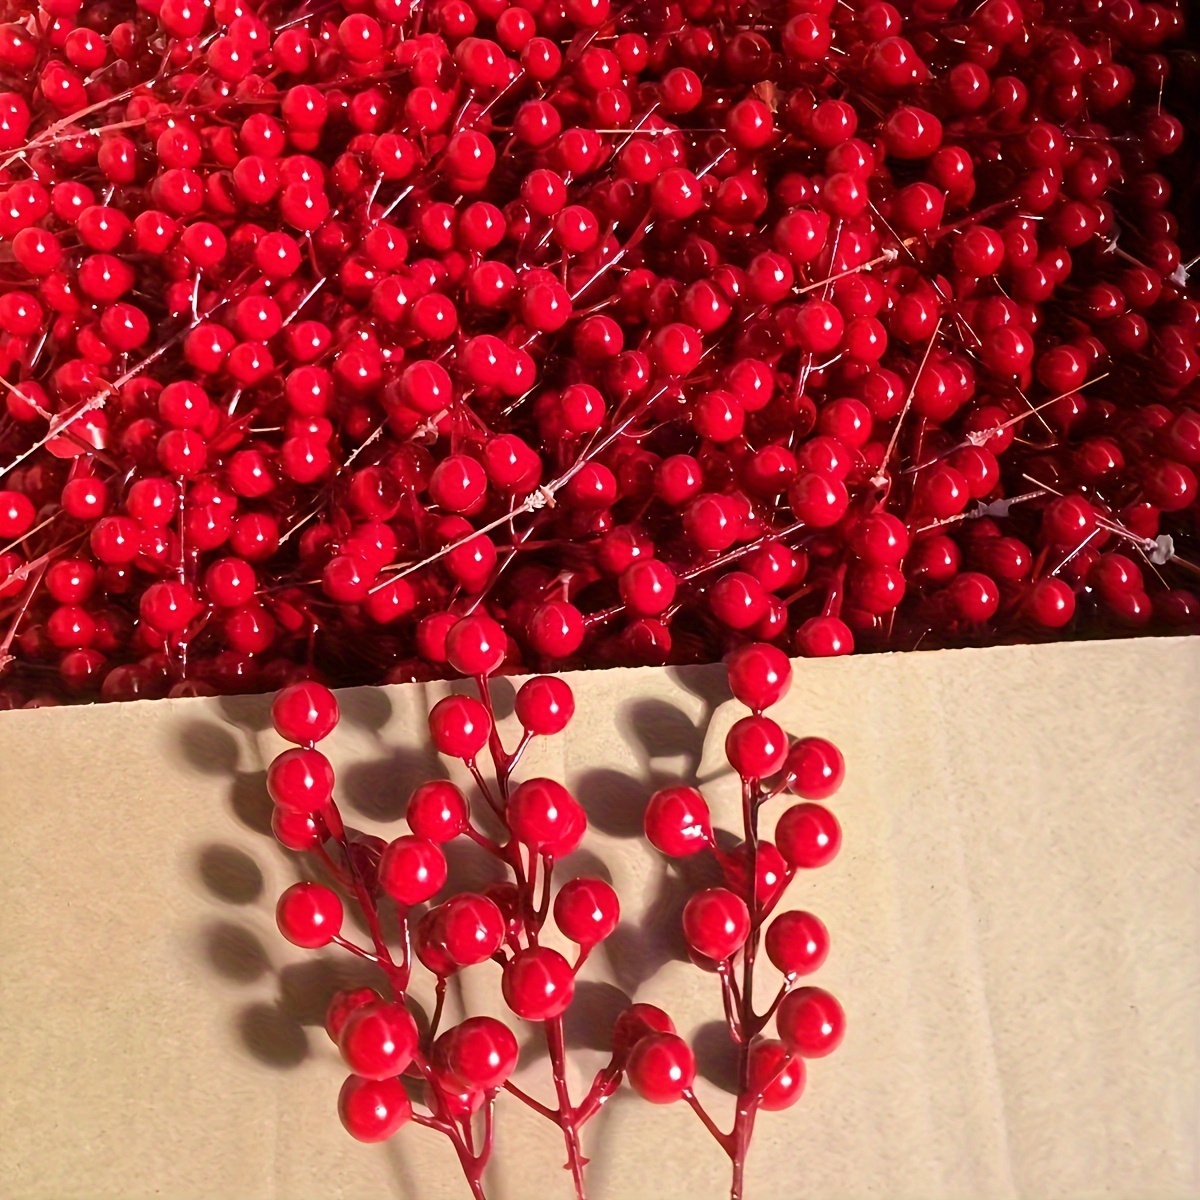 

12pcs, Red Berry Stems Add A Touch Of Christmas Joy To Your Home Decor, And Christmas Decorations Christmas Party Decor Supplies